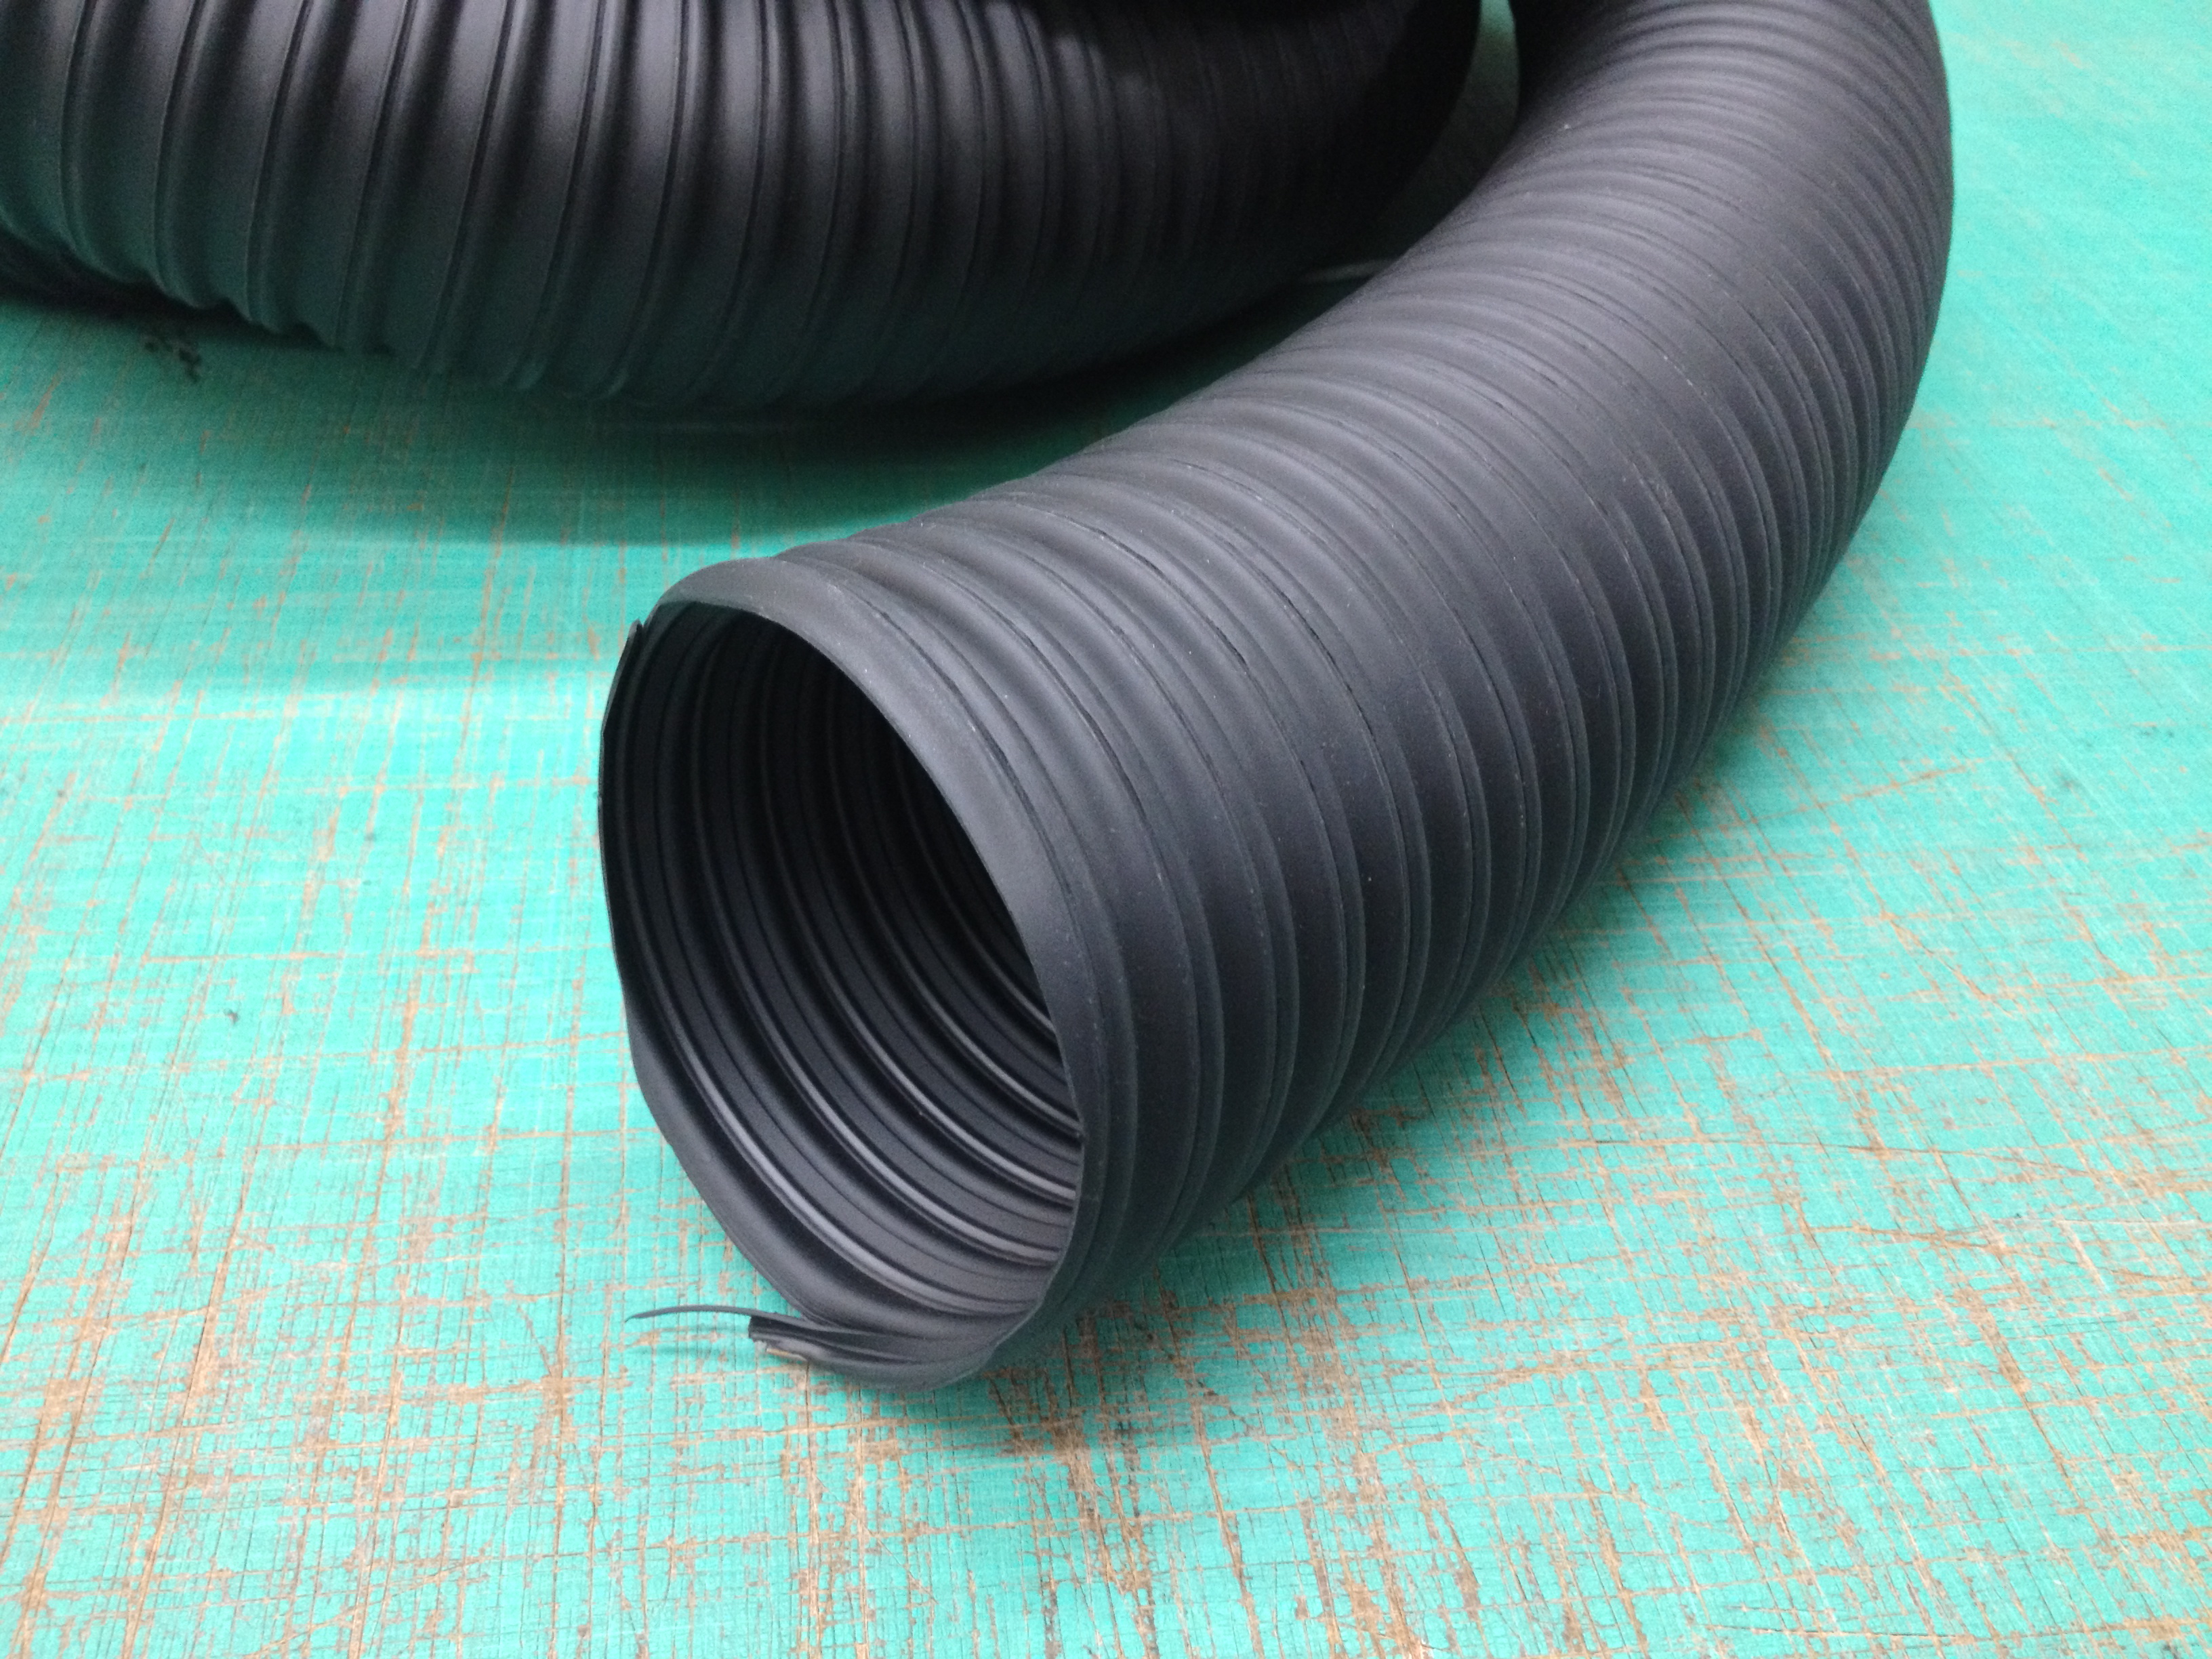 Sold by The Foot 7''ID RFH HOSE/DUCTING BLCK THERMOPLASTIC RUBBER WIRE HELIX 